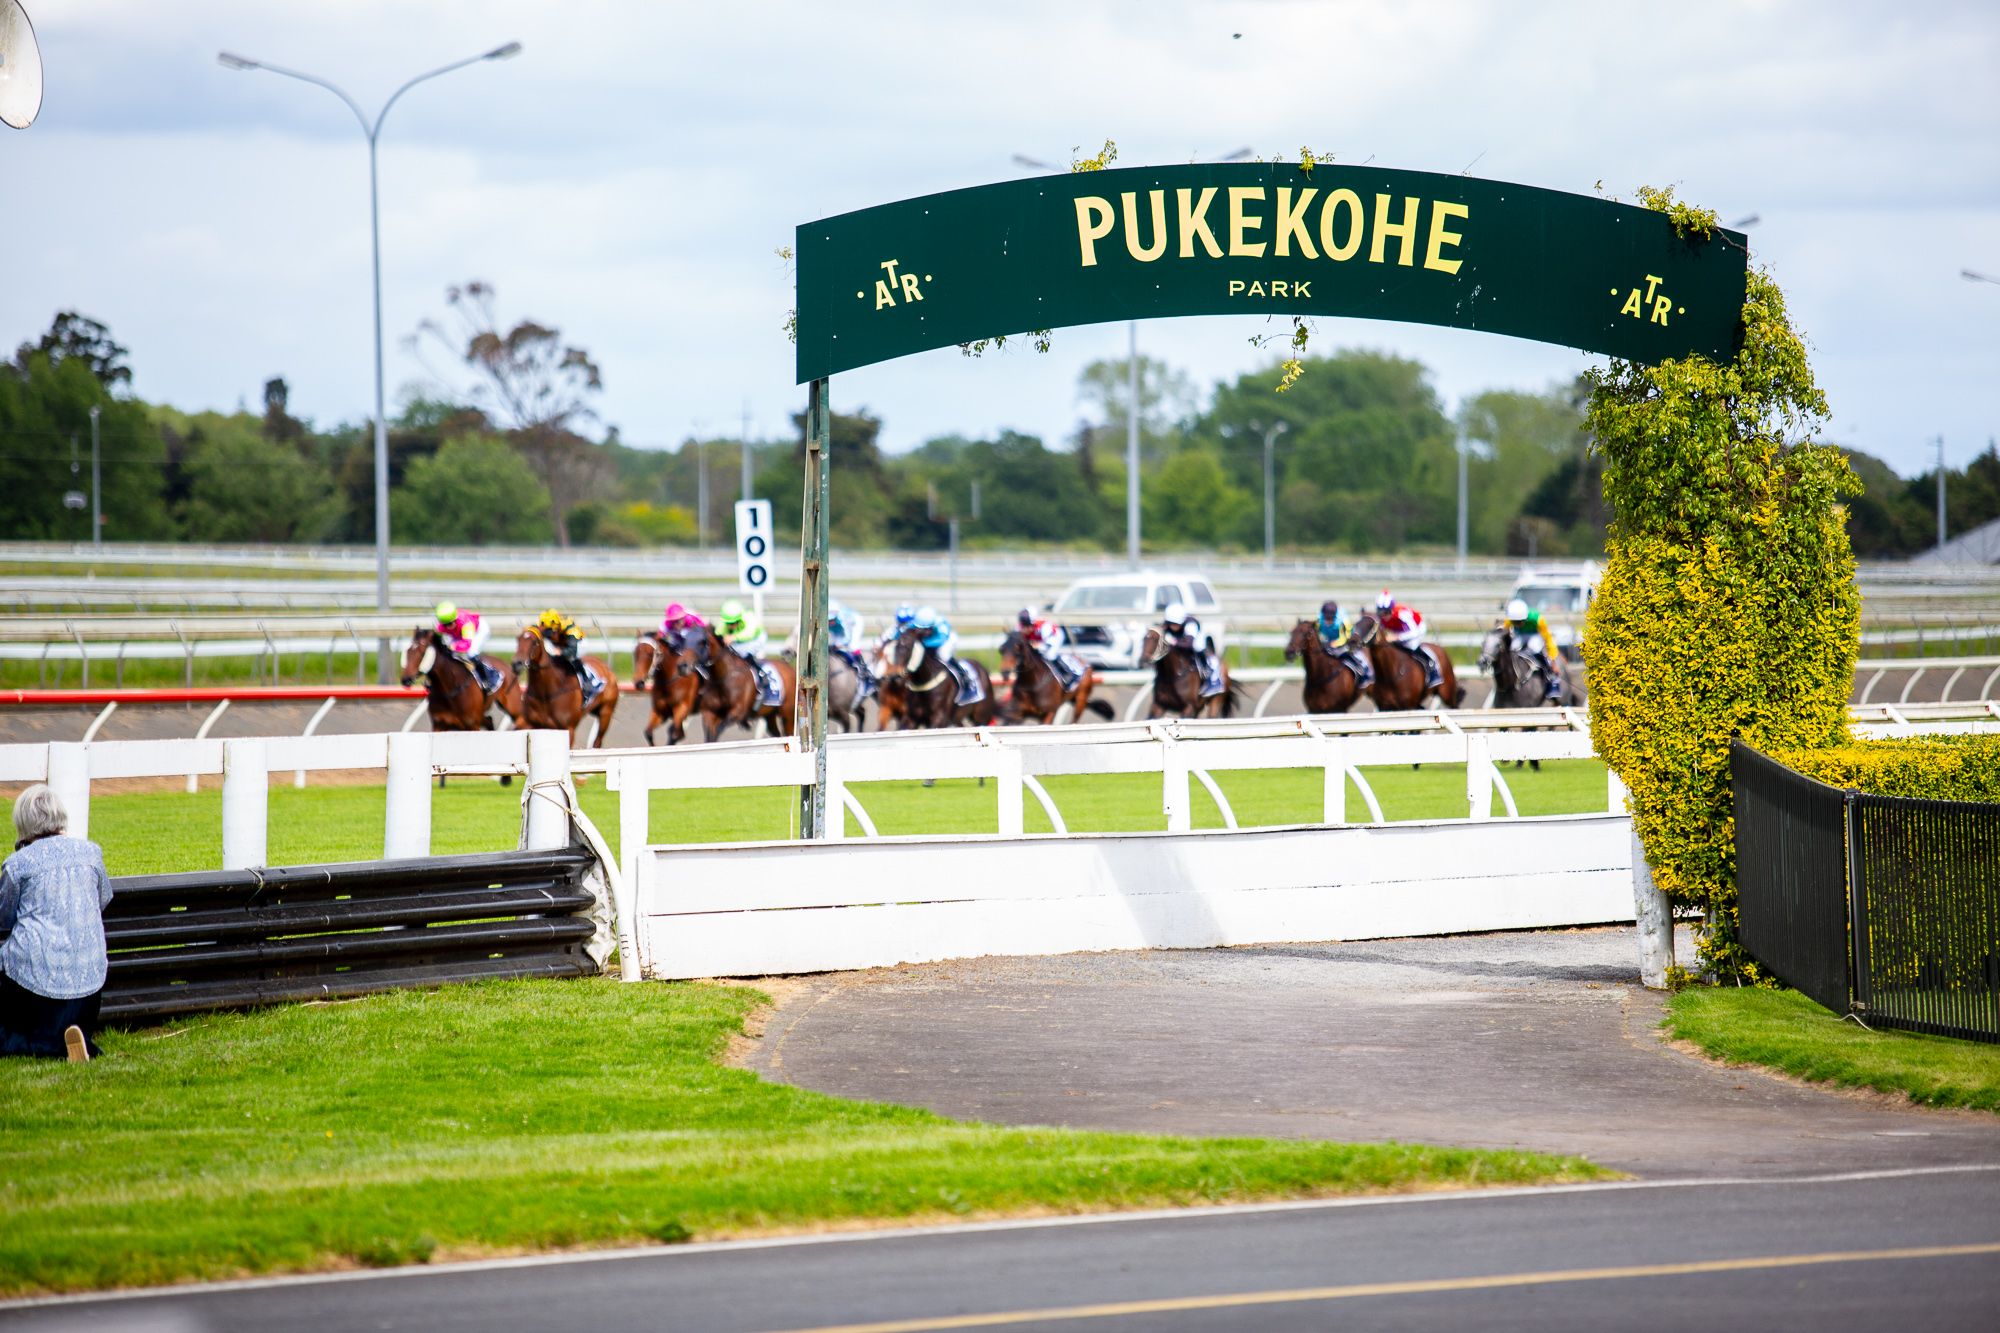 MEDIA RELEASE | tripleSdata is coming to Pukekohe Park this weekend for Counties Cup Day